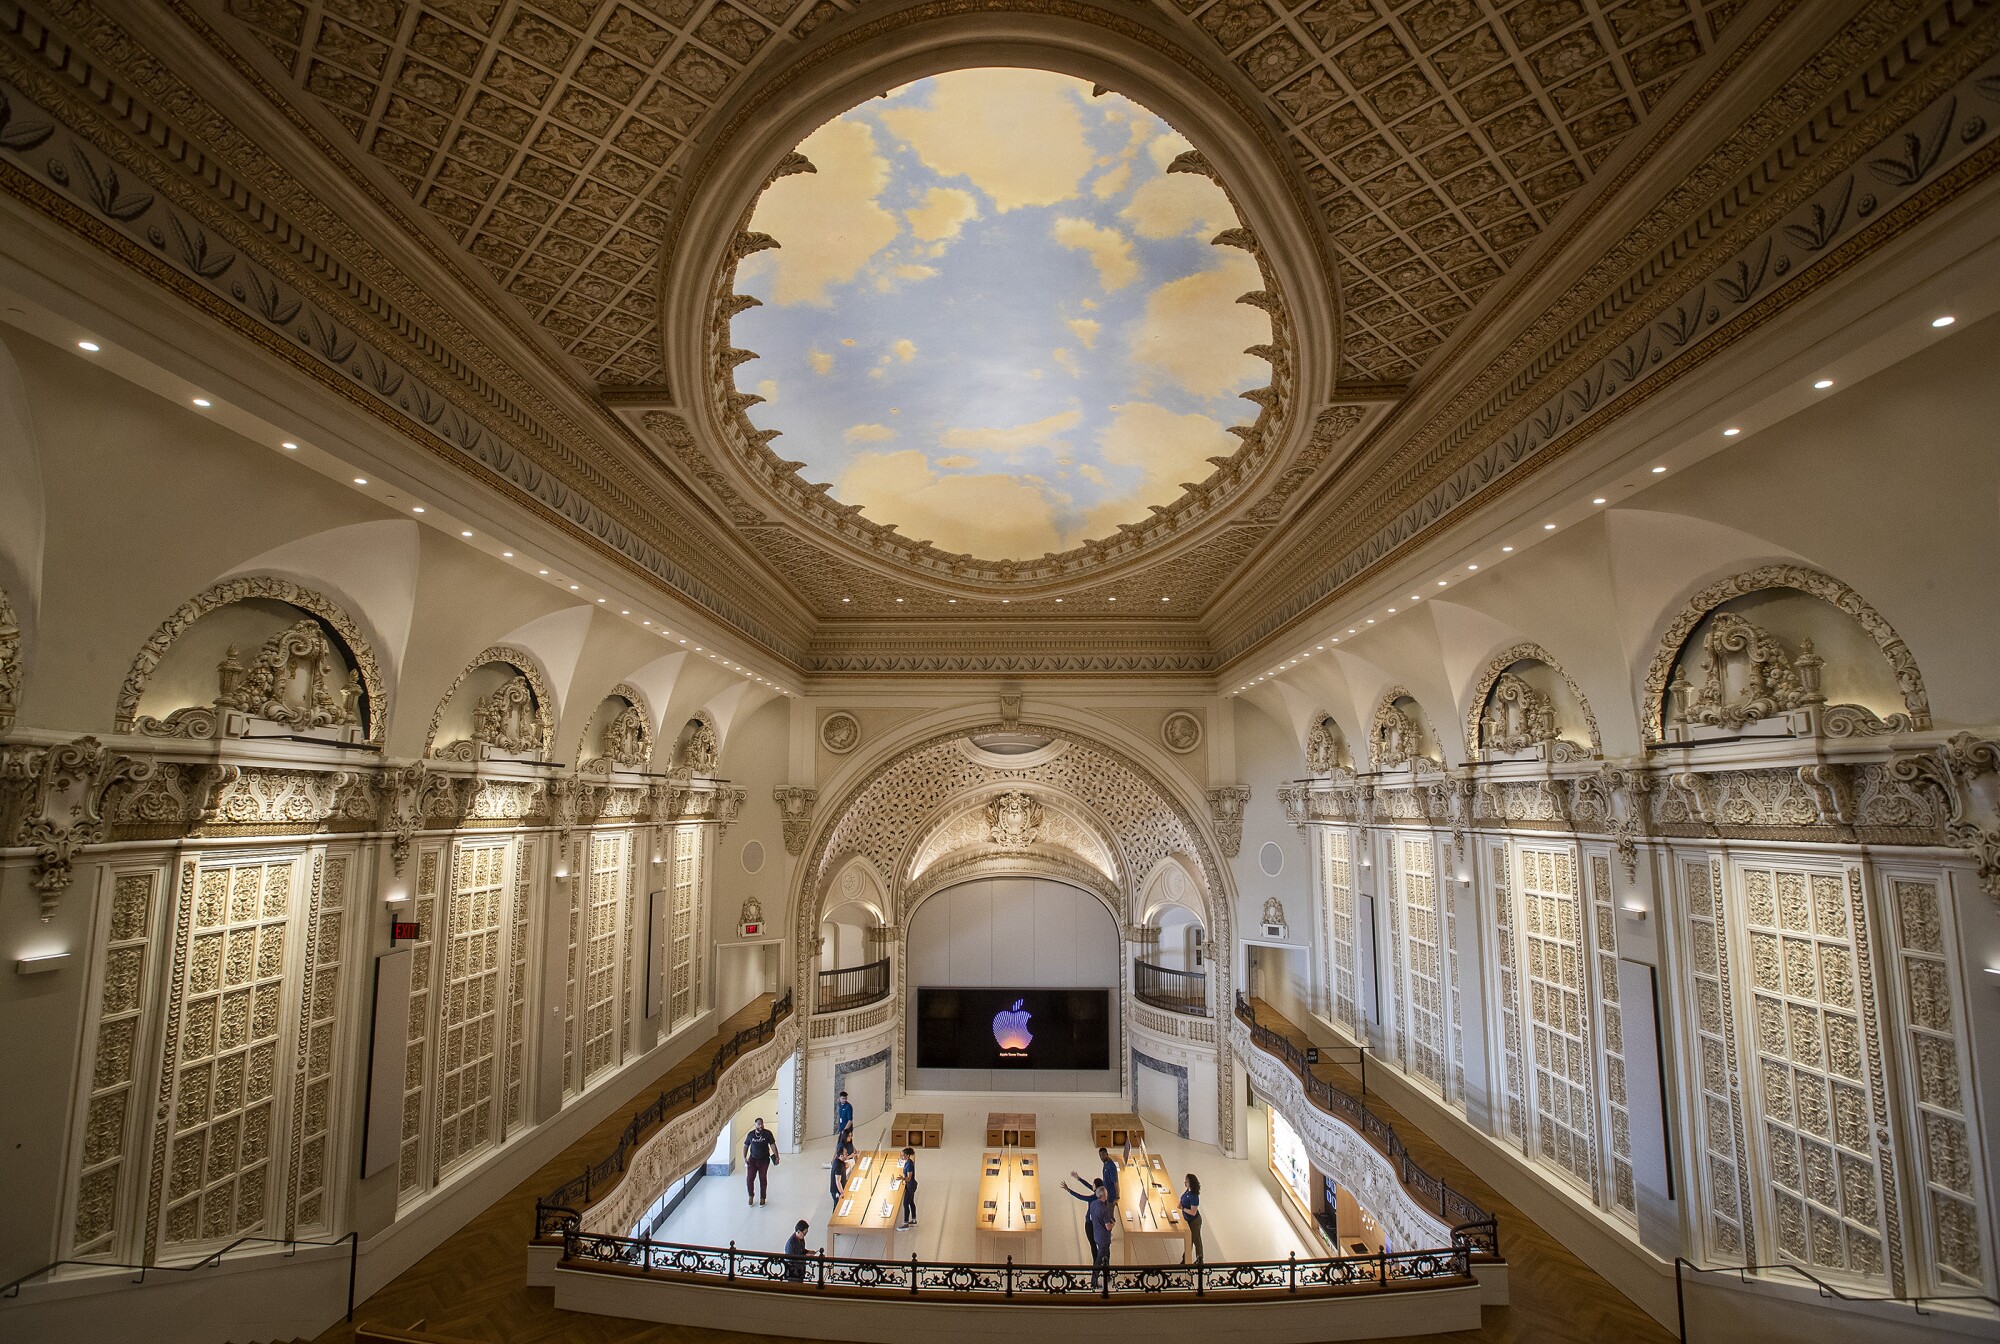 A view from the balcony of the Apple store in the Tower Theatre shows the room's decorative panels and painted ceiling